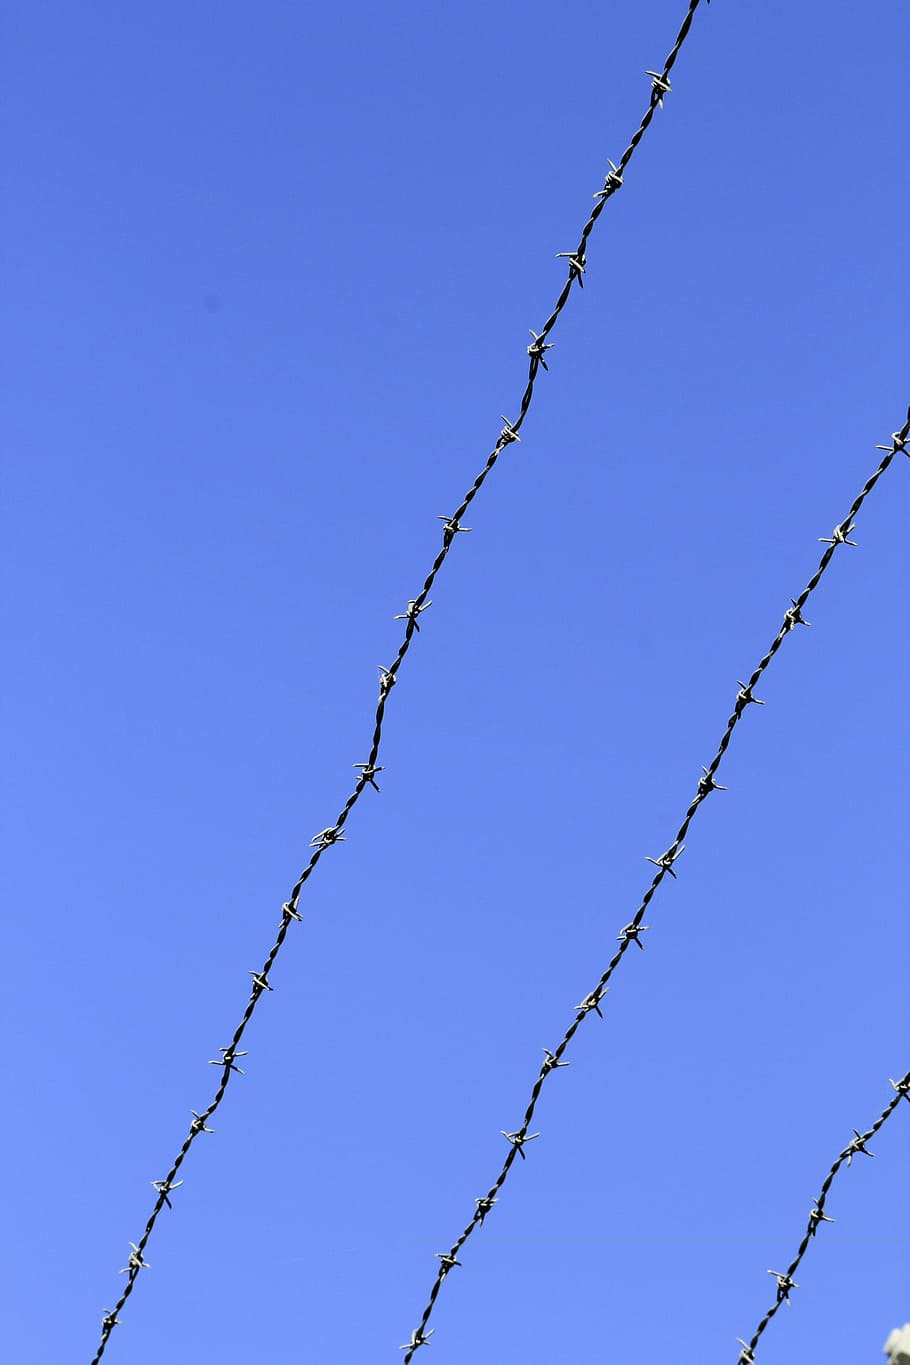 Barb Wire, Barbwire, Fence, wire, security, metal, protection, steel, sharp, prison